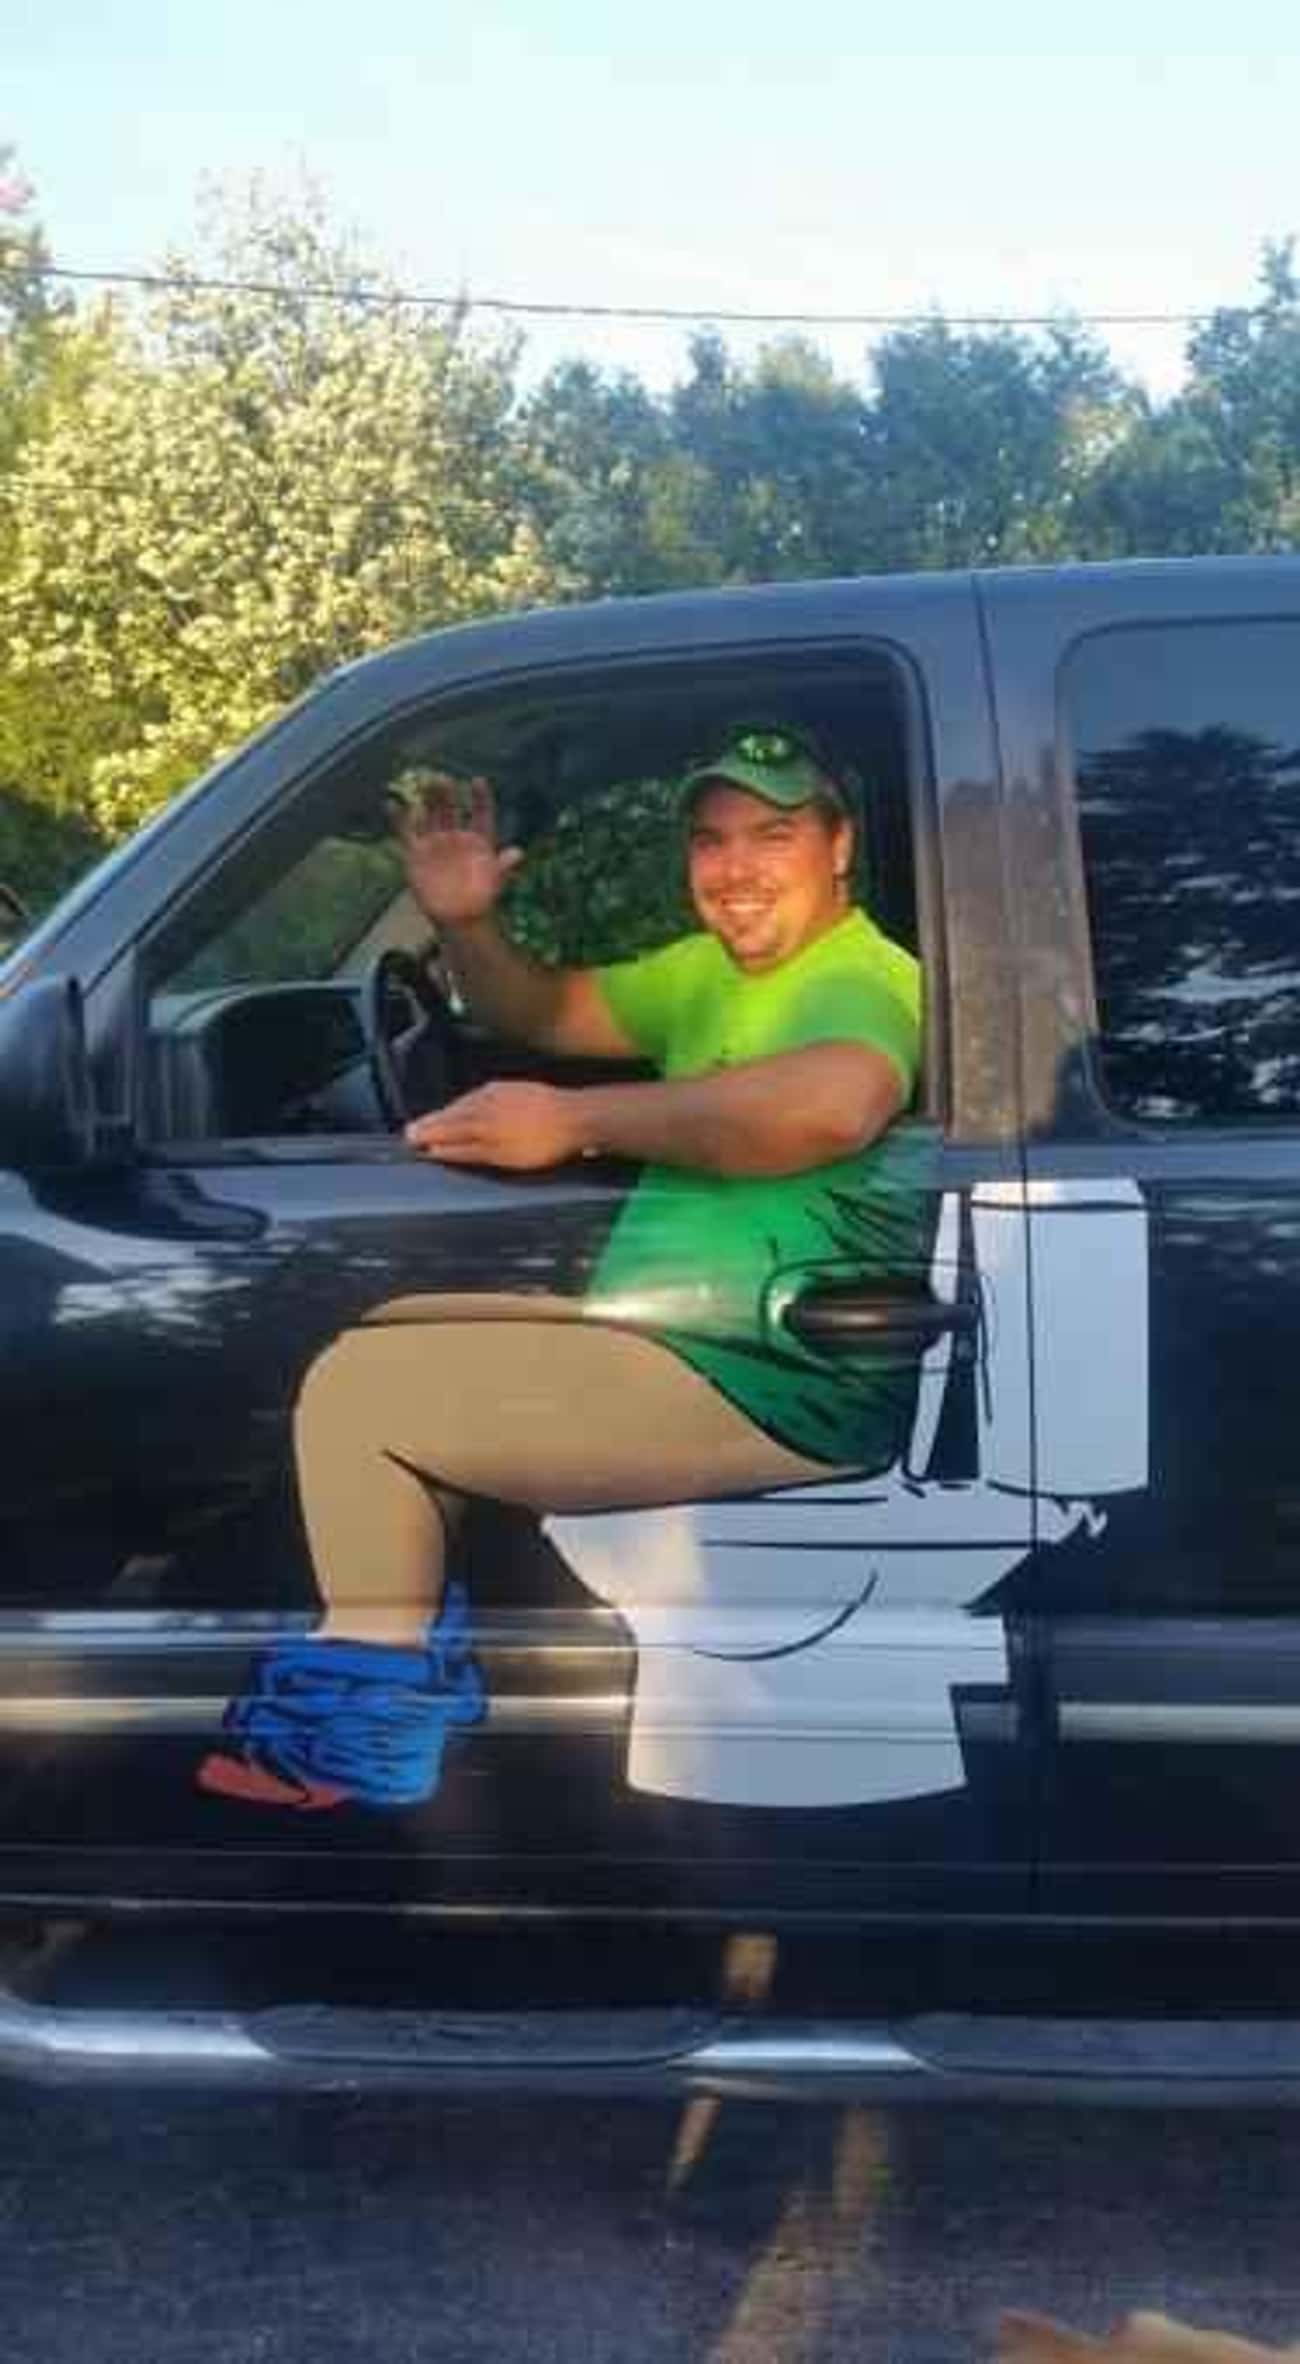 The Toilet Truck